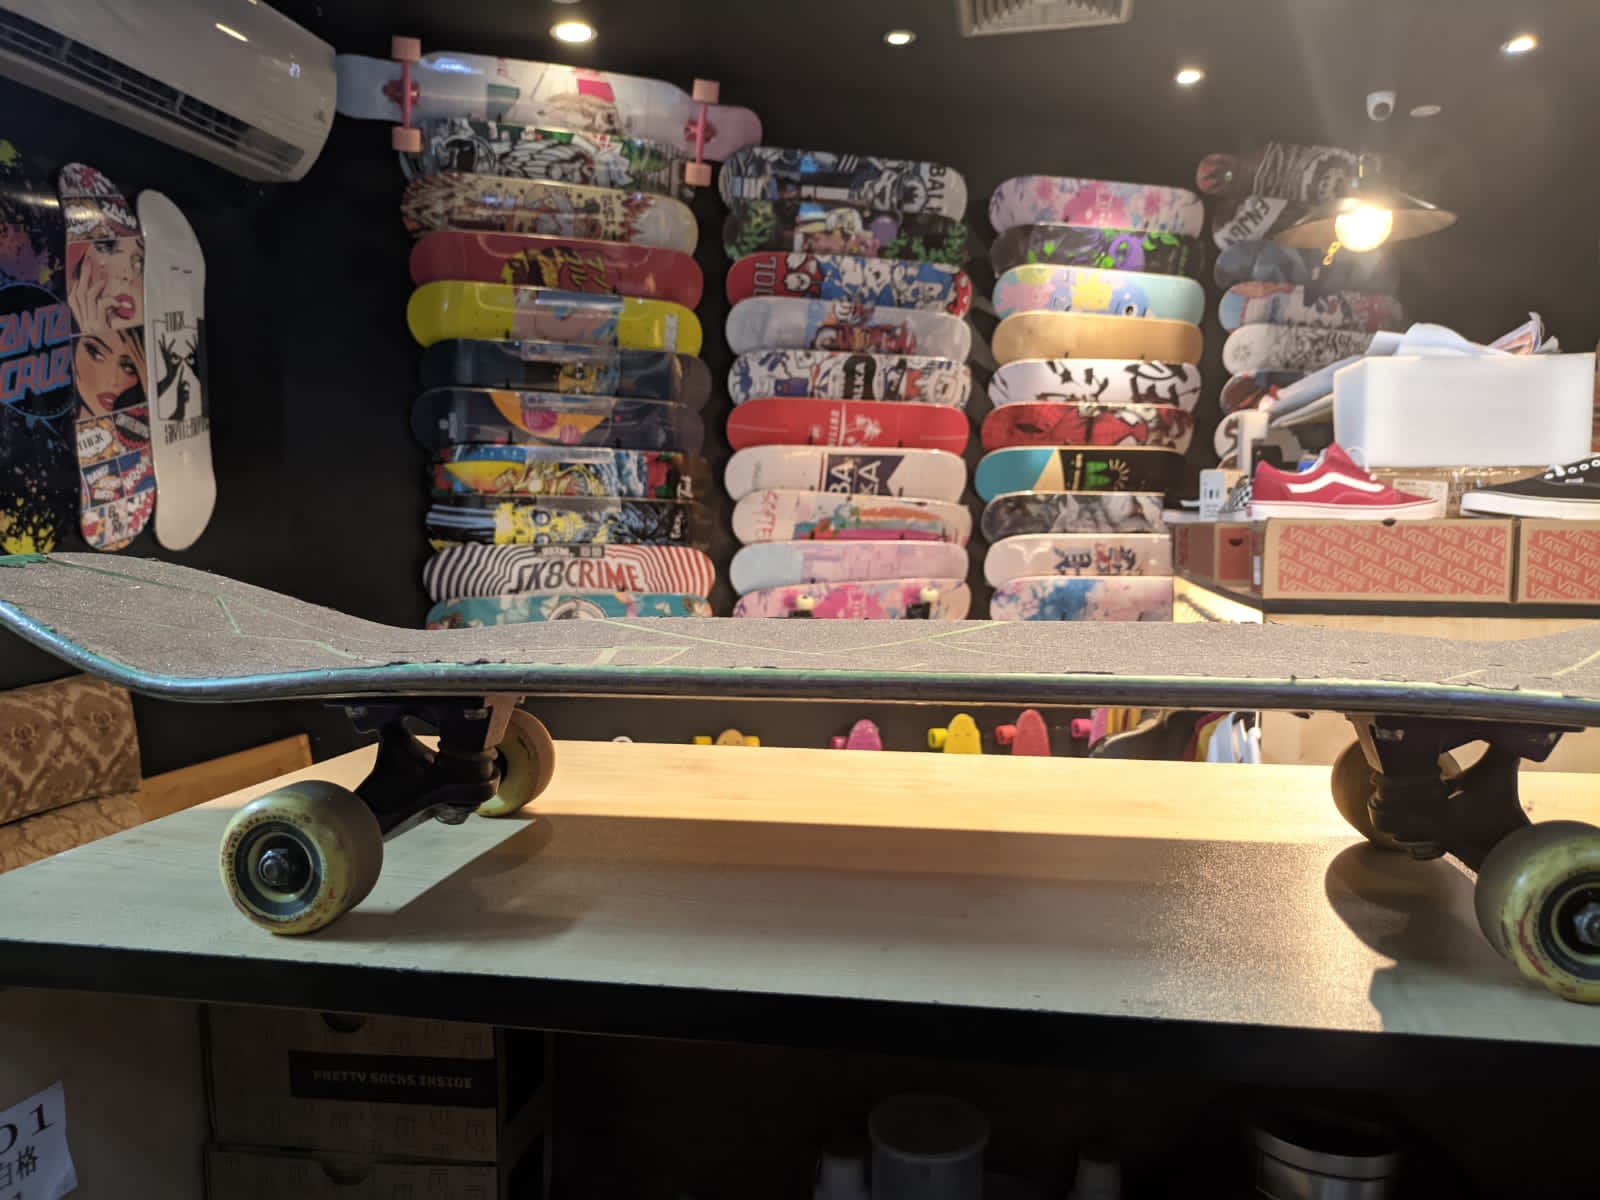 Another view of Kyle's old skateboard